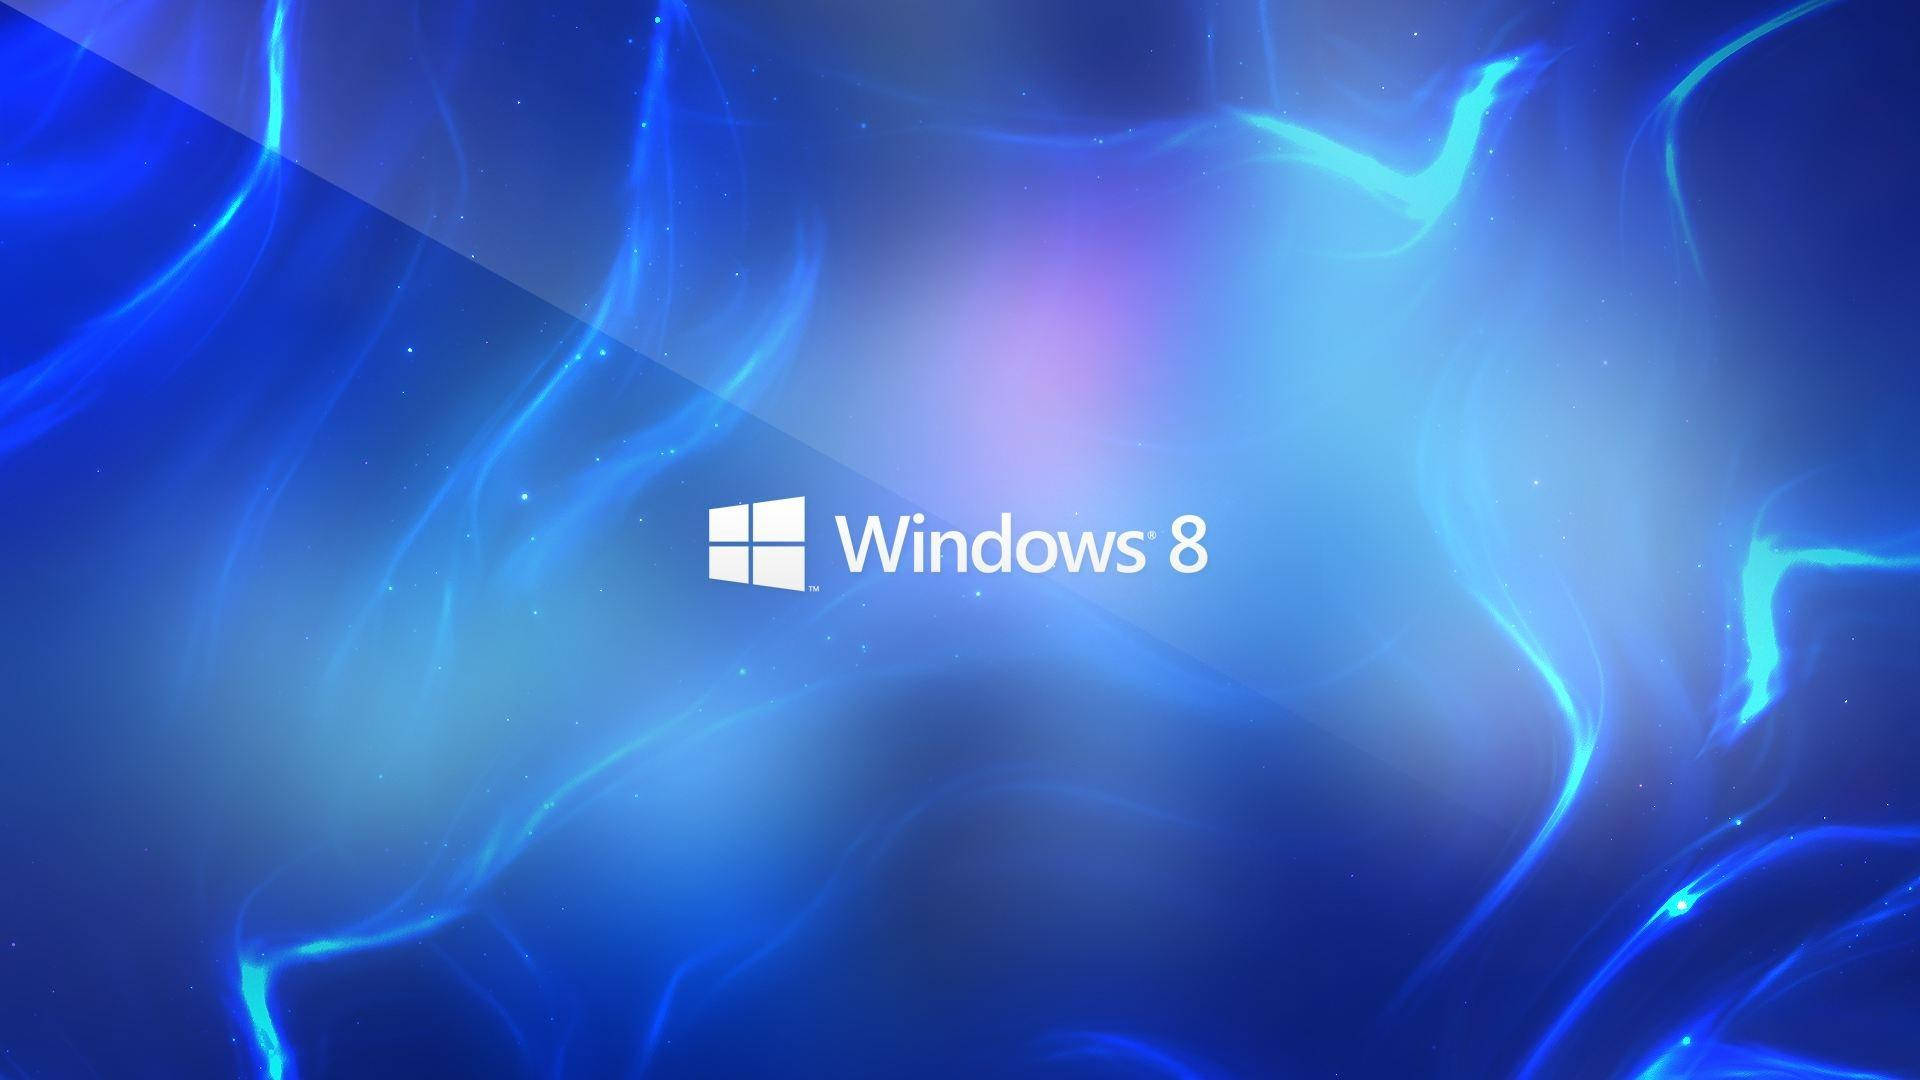 Download Abstract Glowing Lines Windows 8 Background Wallpaper | Wallpapers .com